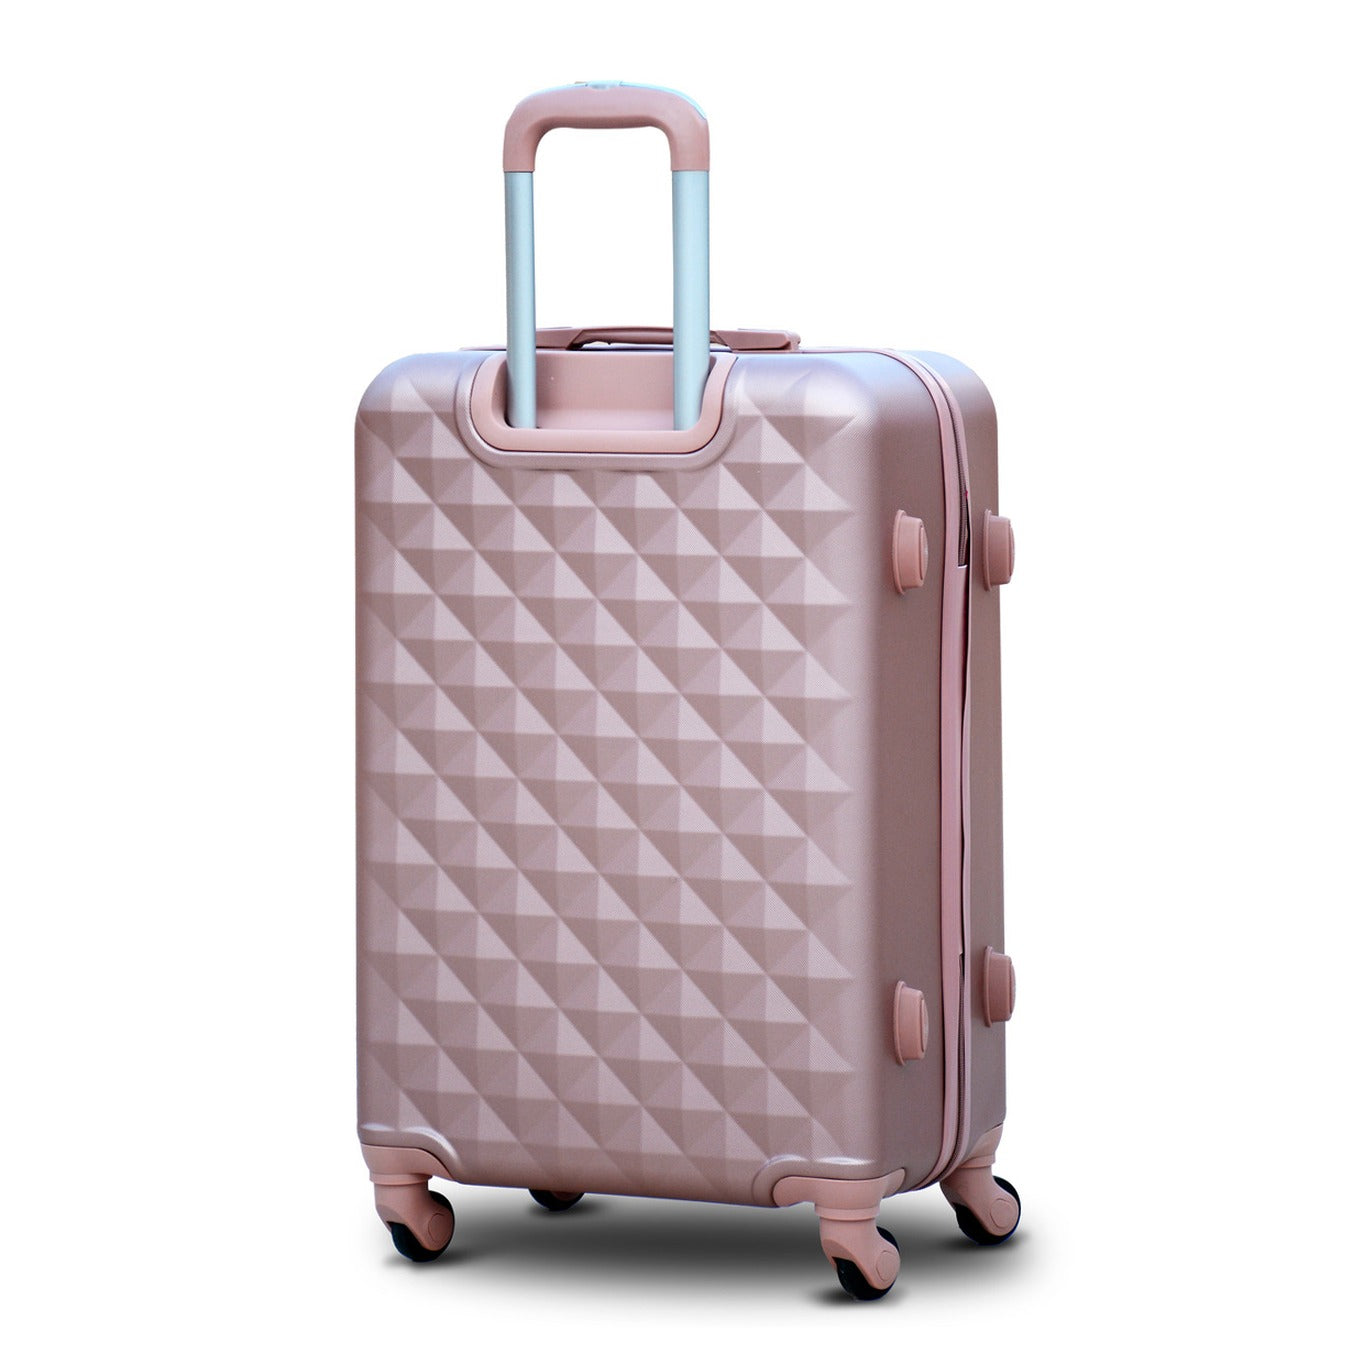 20" Rose Gold Colour Diamond Cut ABS Trolley Lightweight Hard Case Carry On Luggage